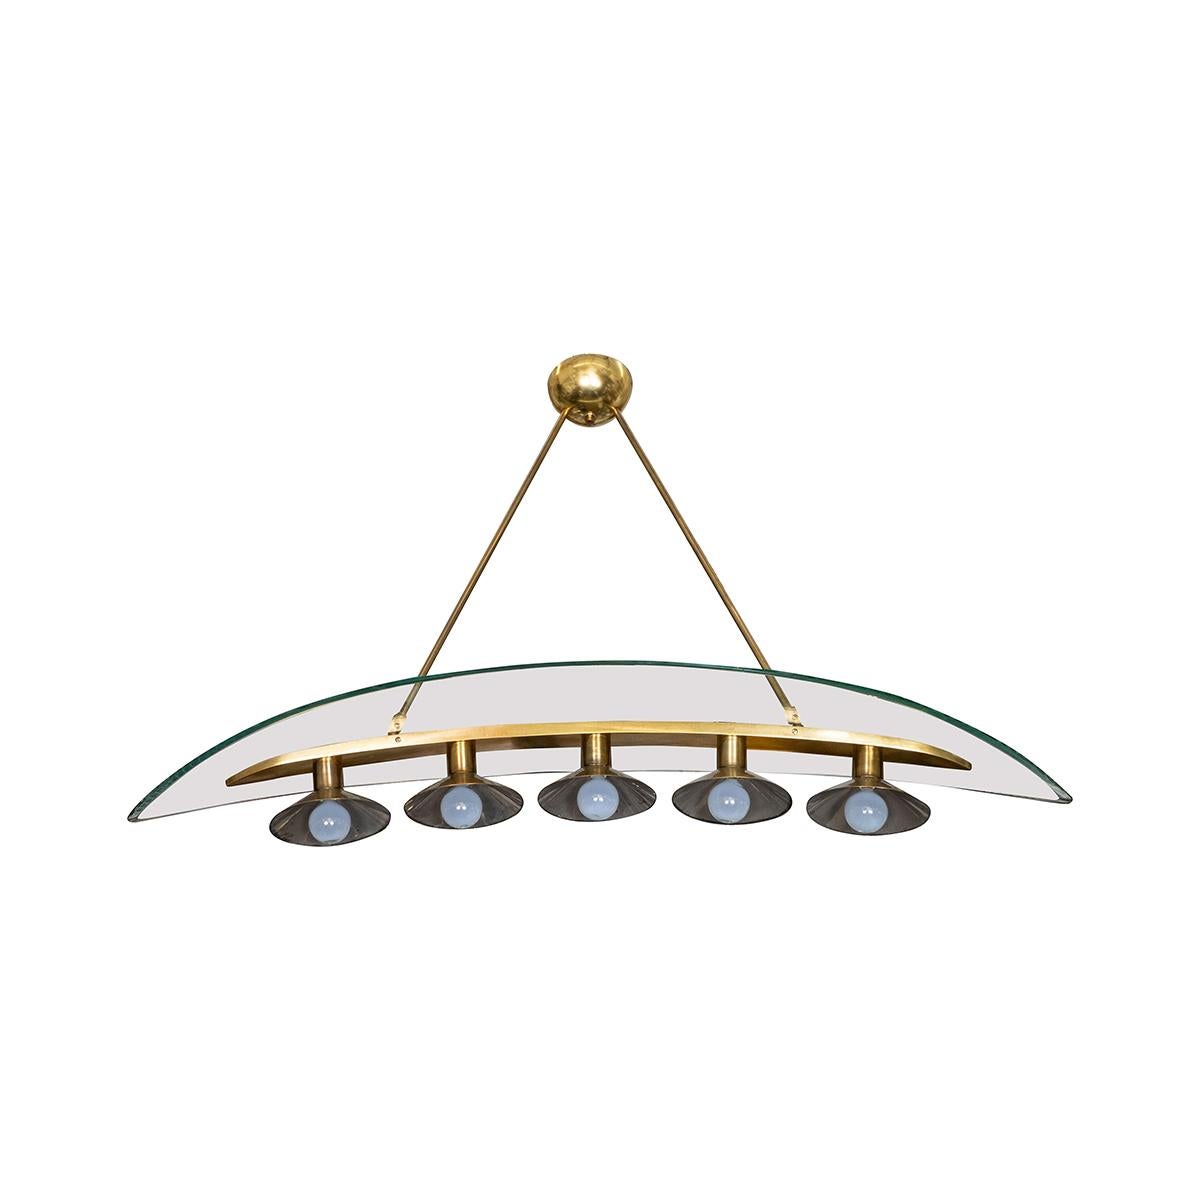 Rare brass five-light pendant by Pietro Chiesa for Fontana Arte. Features a large curved glass element. Exquisitely restored and UL certified.